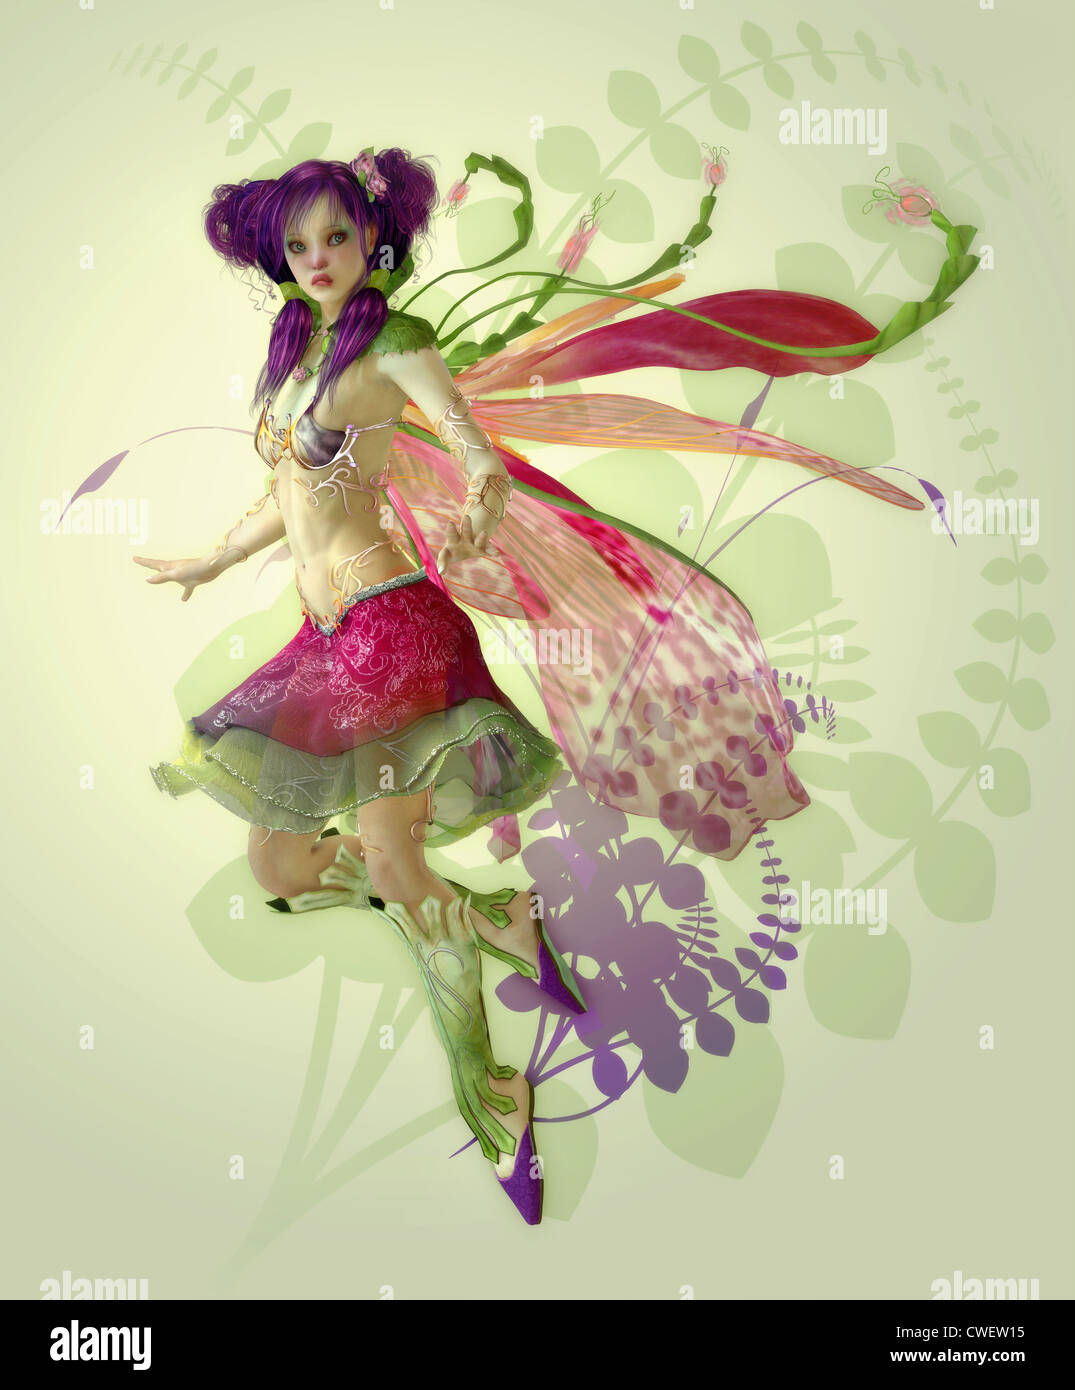 a graceful fairy with wings and a cute hairstyle Stock Photo